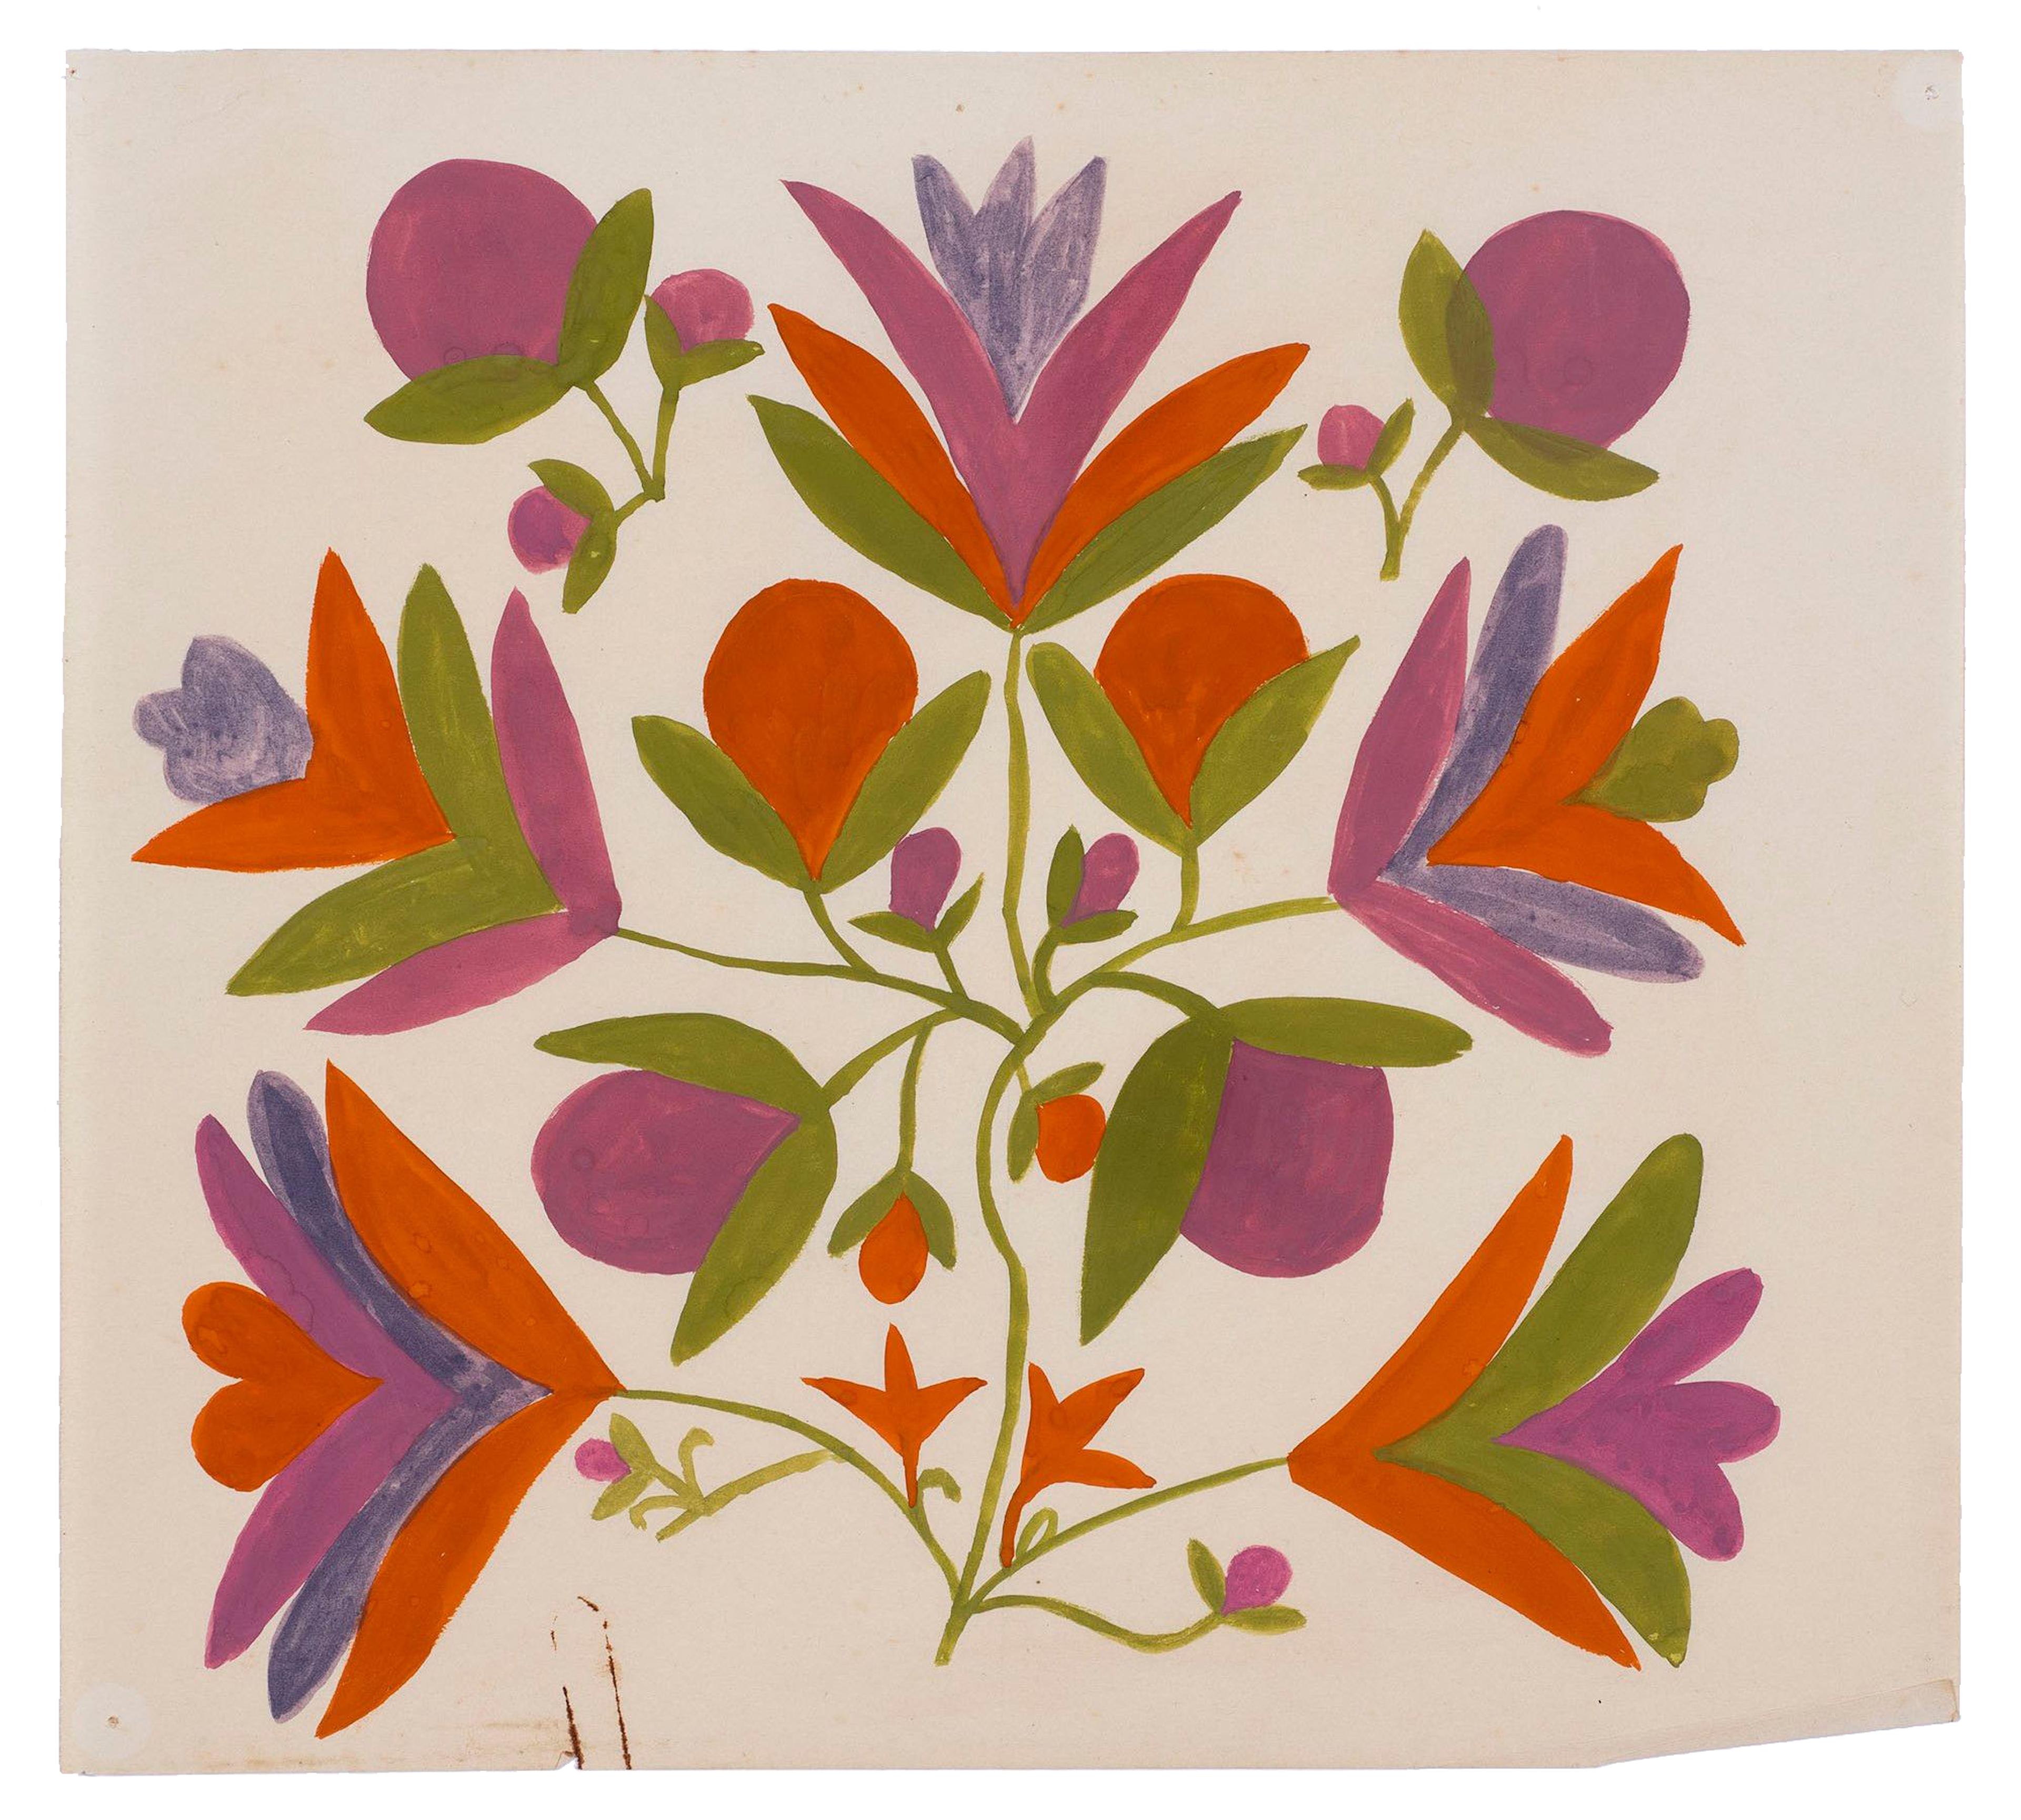 Painting of flowers on a vine in purple, orange, green and blue